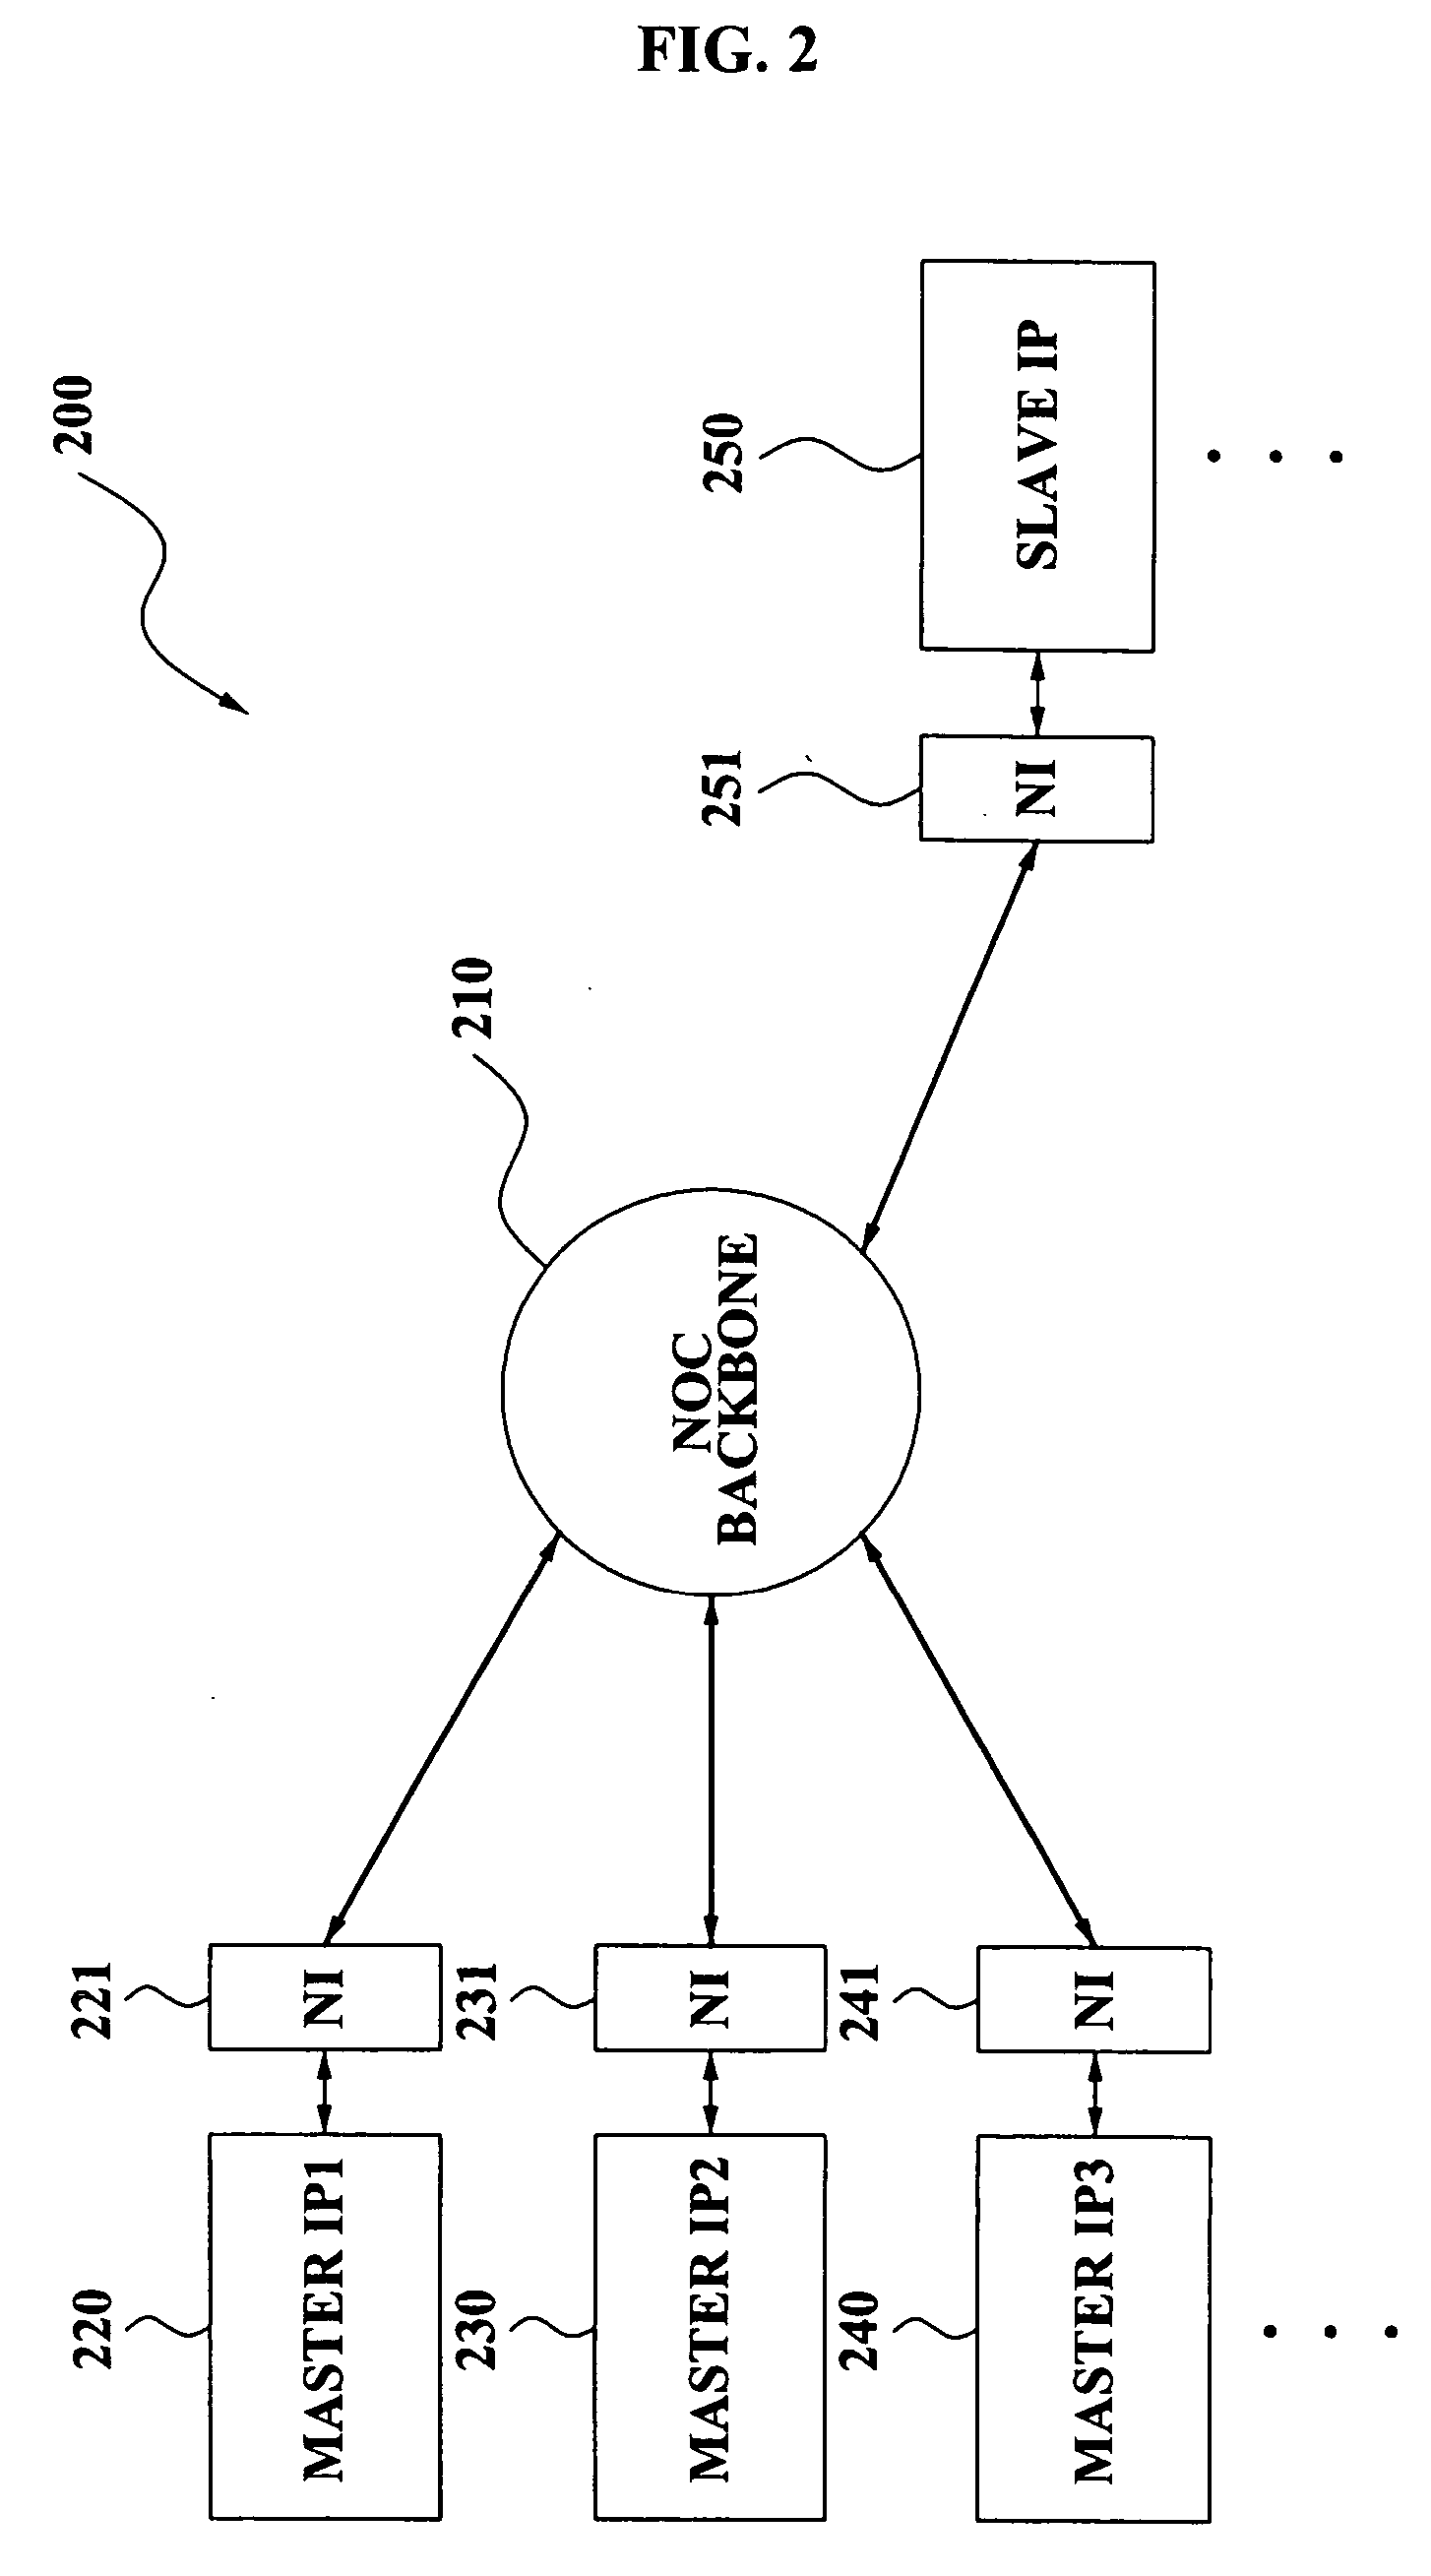 Network interface controlling lock operation in accordance with advanced extensible interface protocol, packet data communication on-chip interconnect system including the network interface, and method of operating the network interface